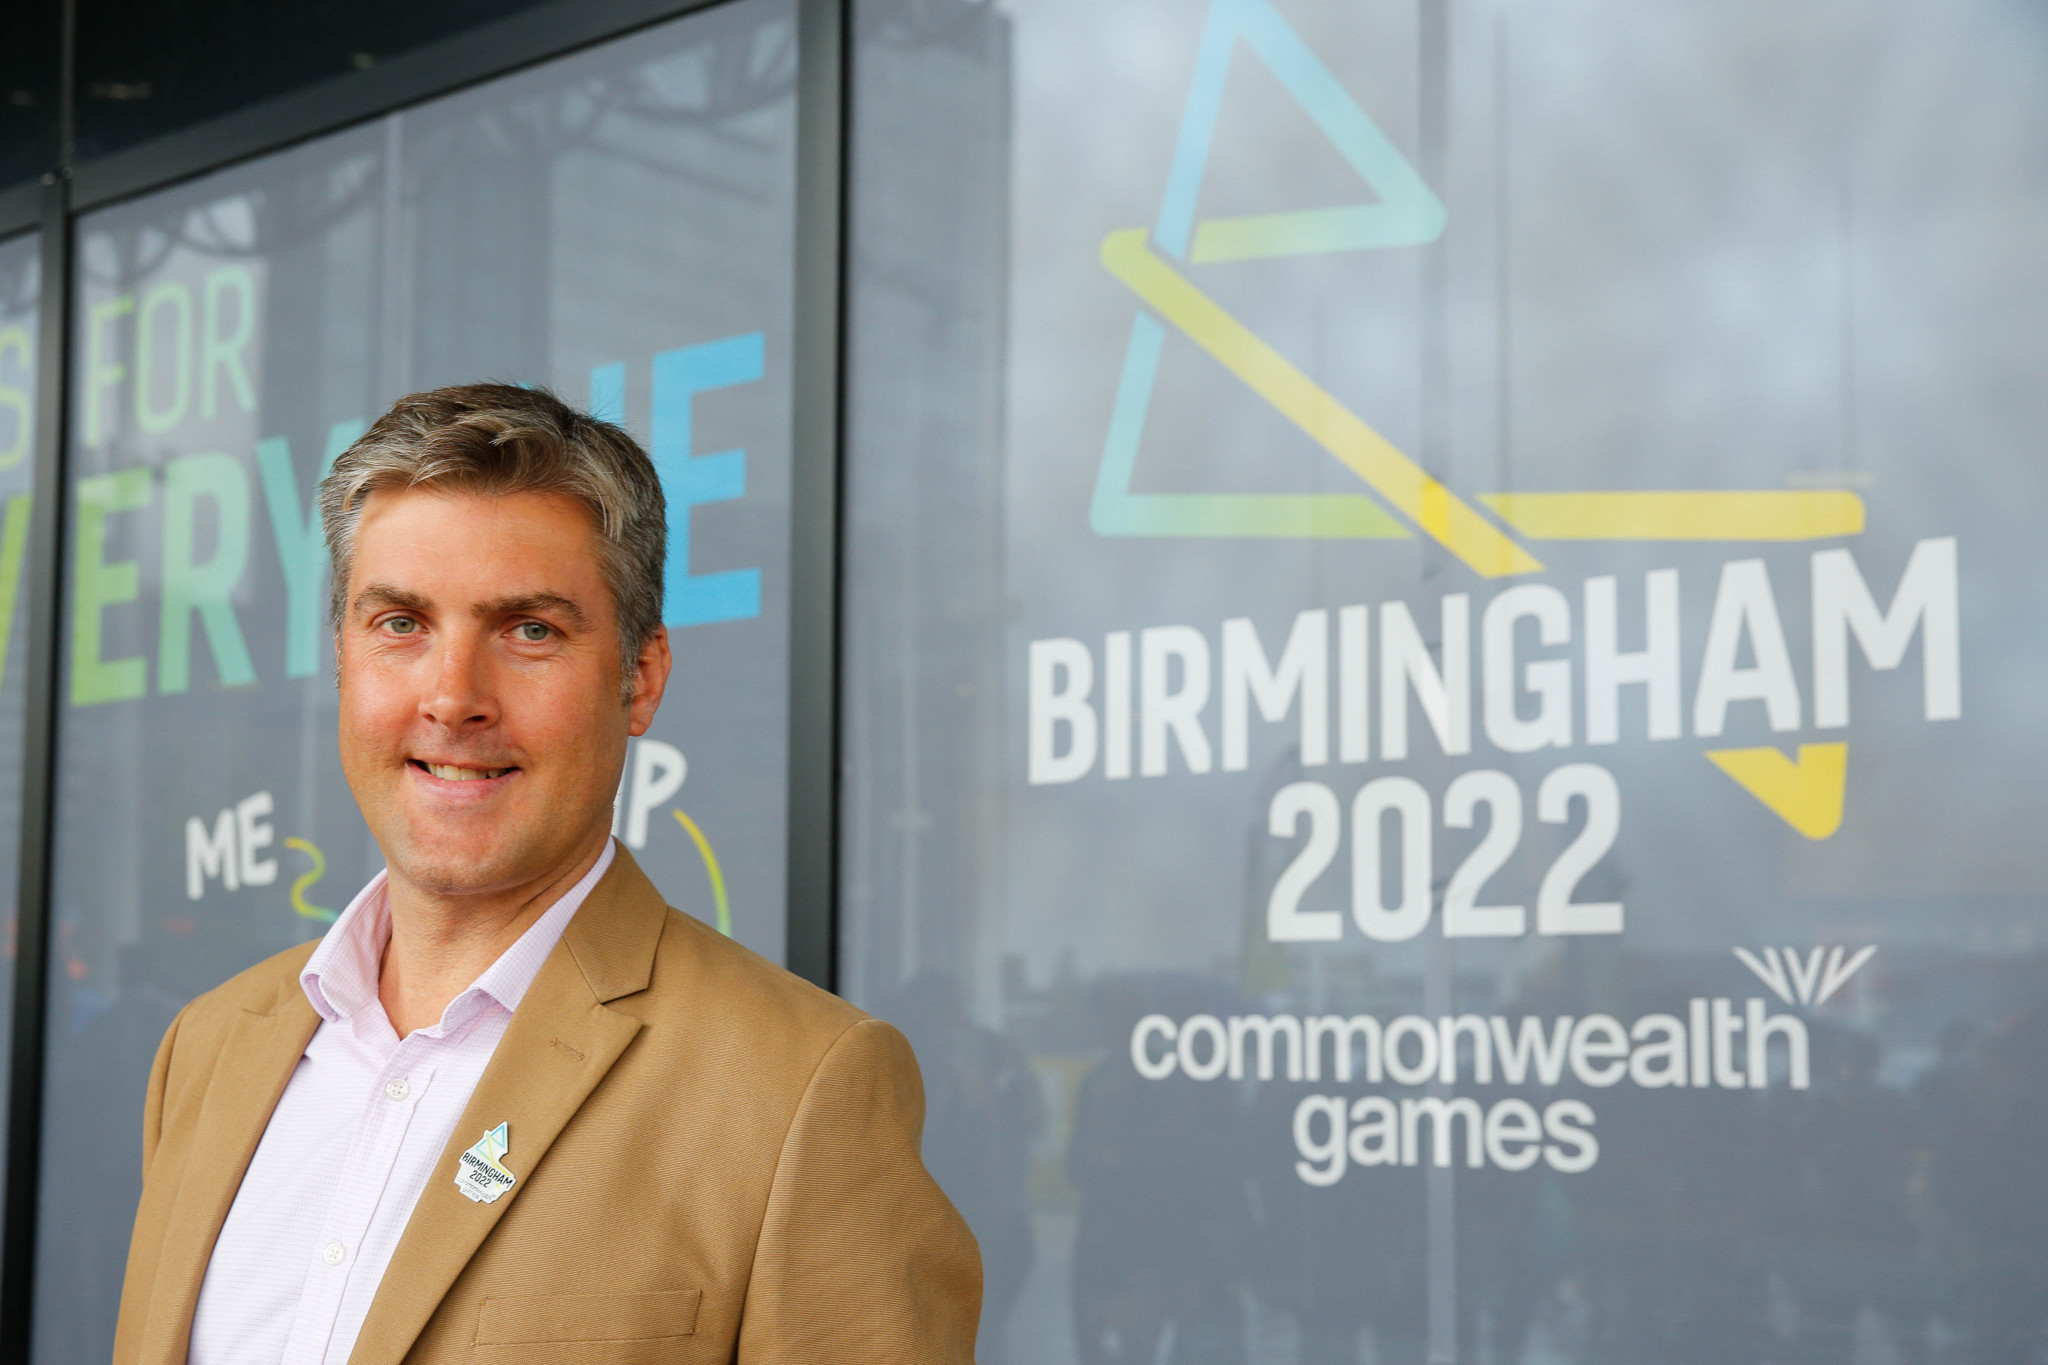 Birmingham 2022 chief executive Ian Reid claimed Solihull could become a 